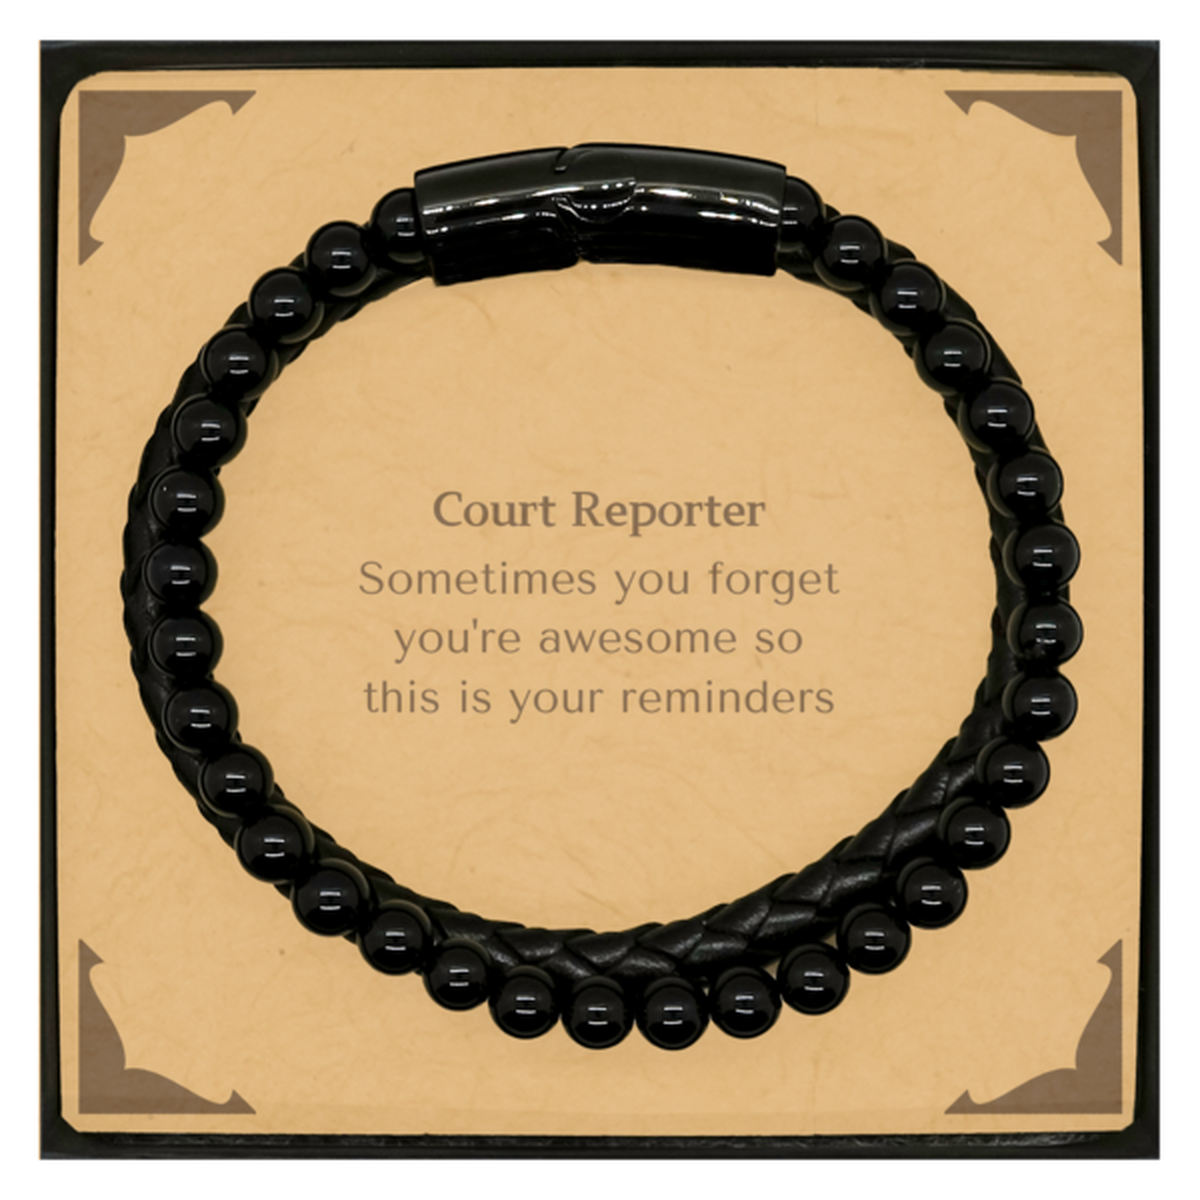 Sentimental Court Reporter Stone Leather Bracelets, Court Reporter Sometimes you forget you're awesome so this is your reminders, Graduation Christmas Birthday Gifts for Court Reporter, Men, Women, Coworkers